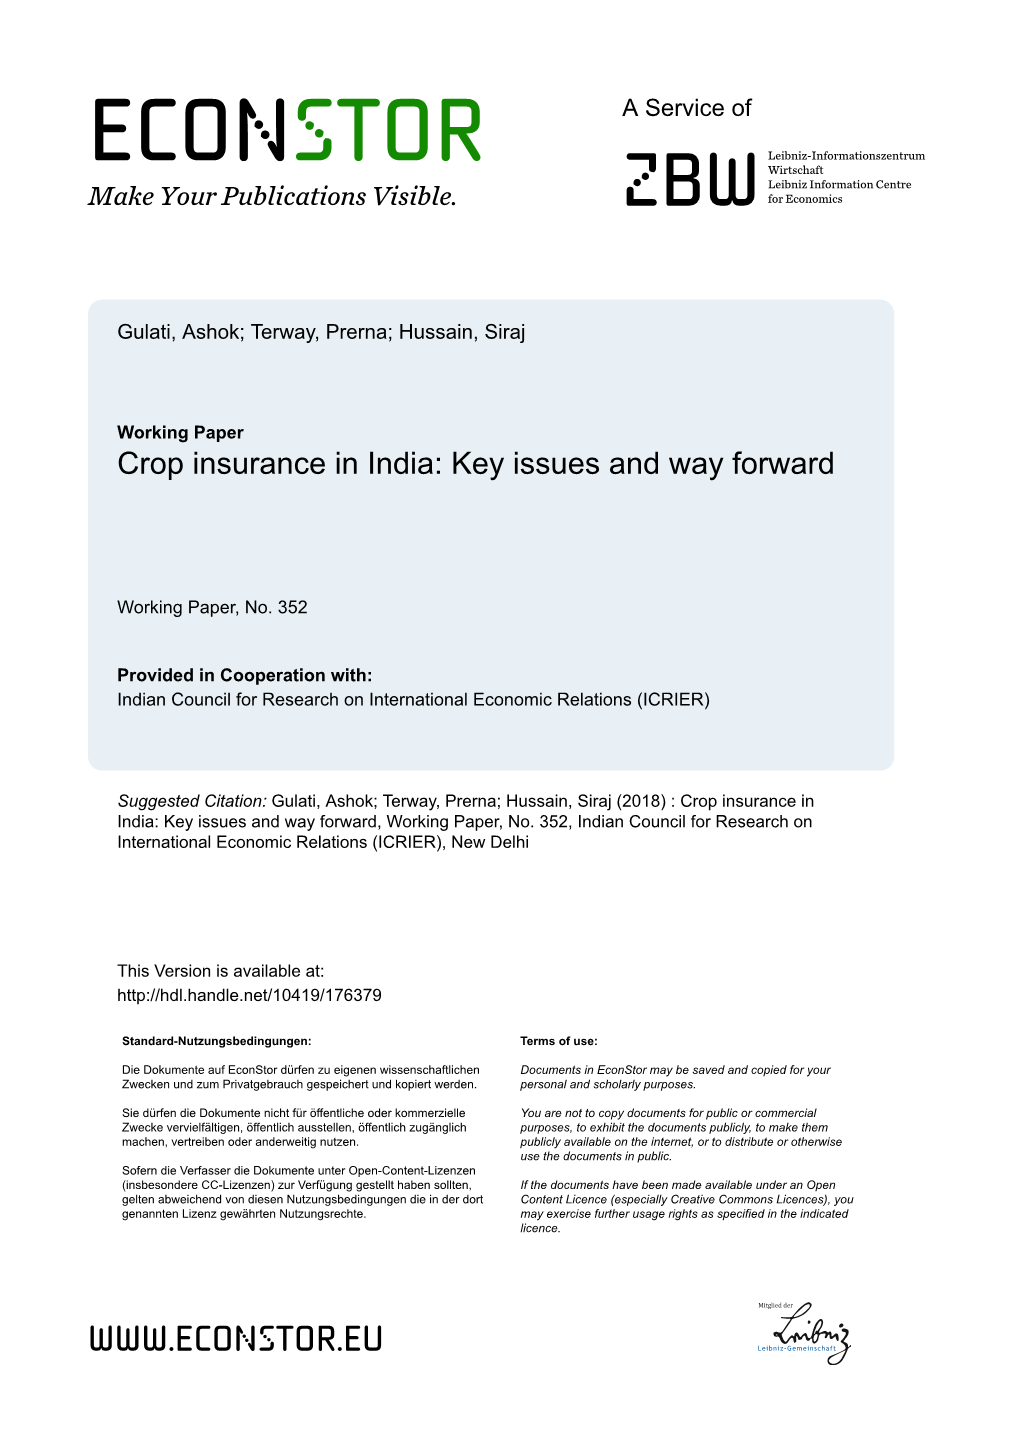 Crop Insurance in India: Key Issues and Way Forward